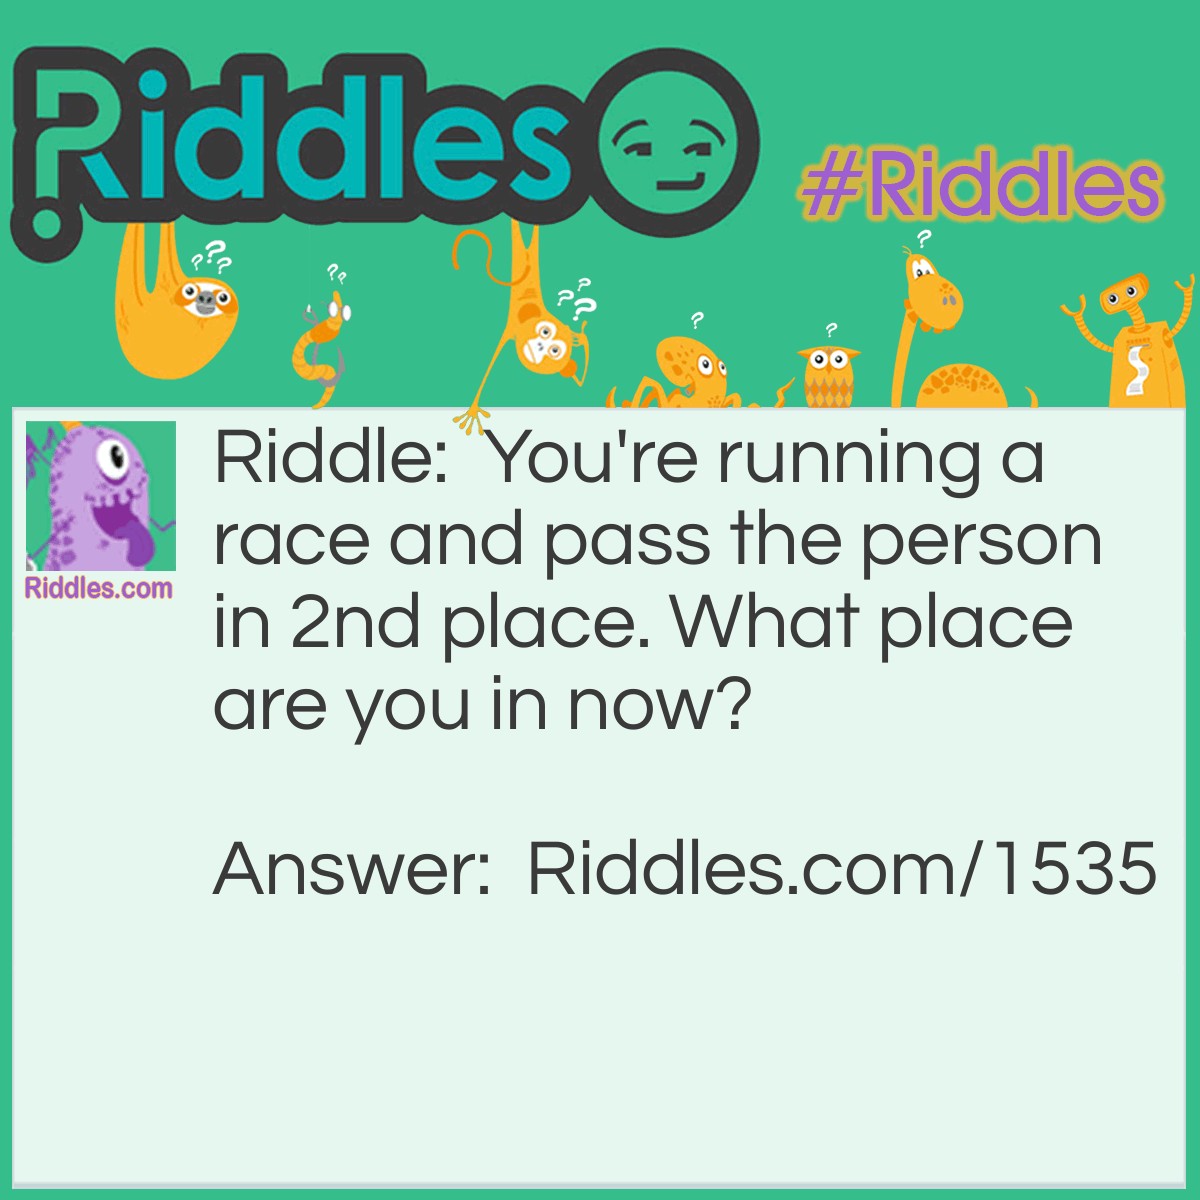 Riddle: You're running a race and pass the person in 2nd place. What place are you in now? Answer: You're in second place. You didn't pass the person in first.